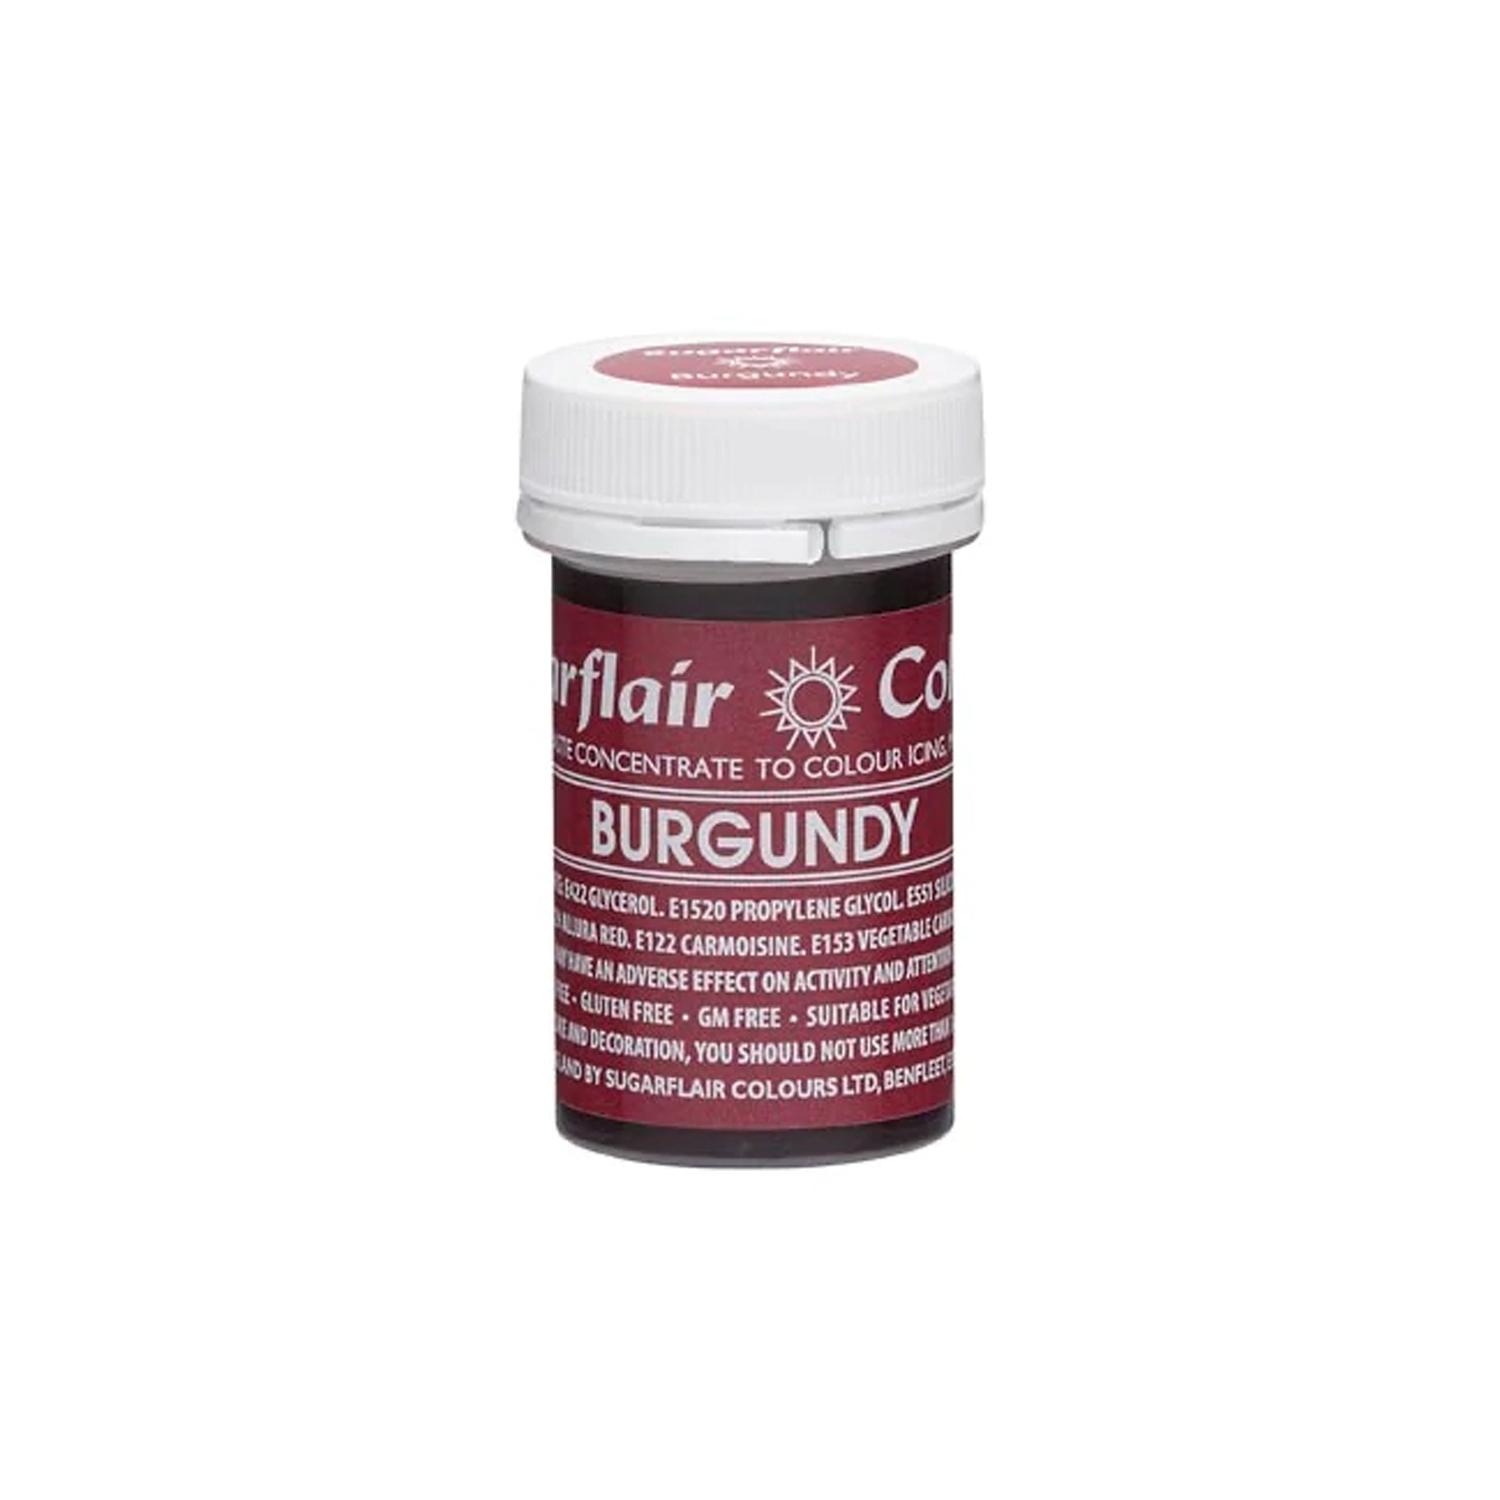 SUGARFLAIR COLOURS SPECTRAL PASTE BURGUNDY 25GMS